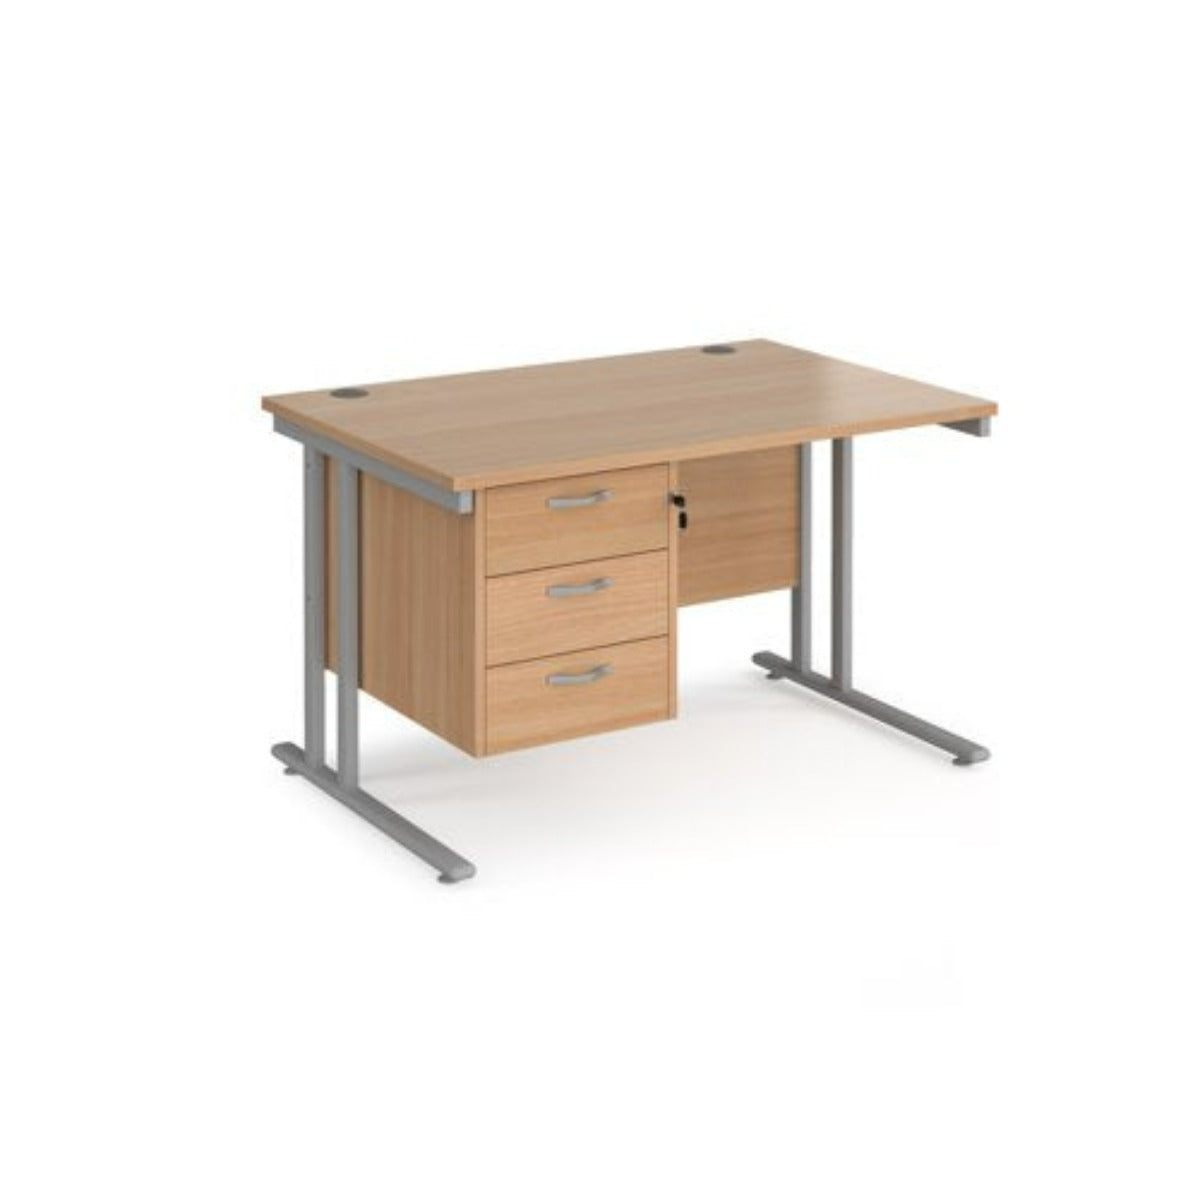 Straight desk 128 with desk high pedestal  (1200mm x 800mm) - Various finishes